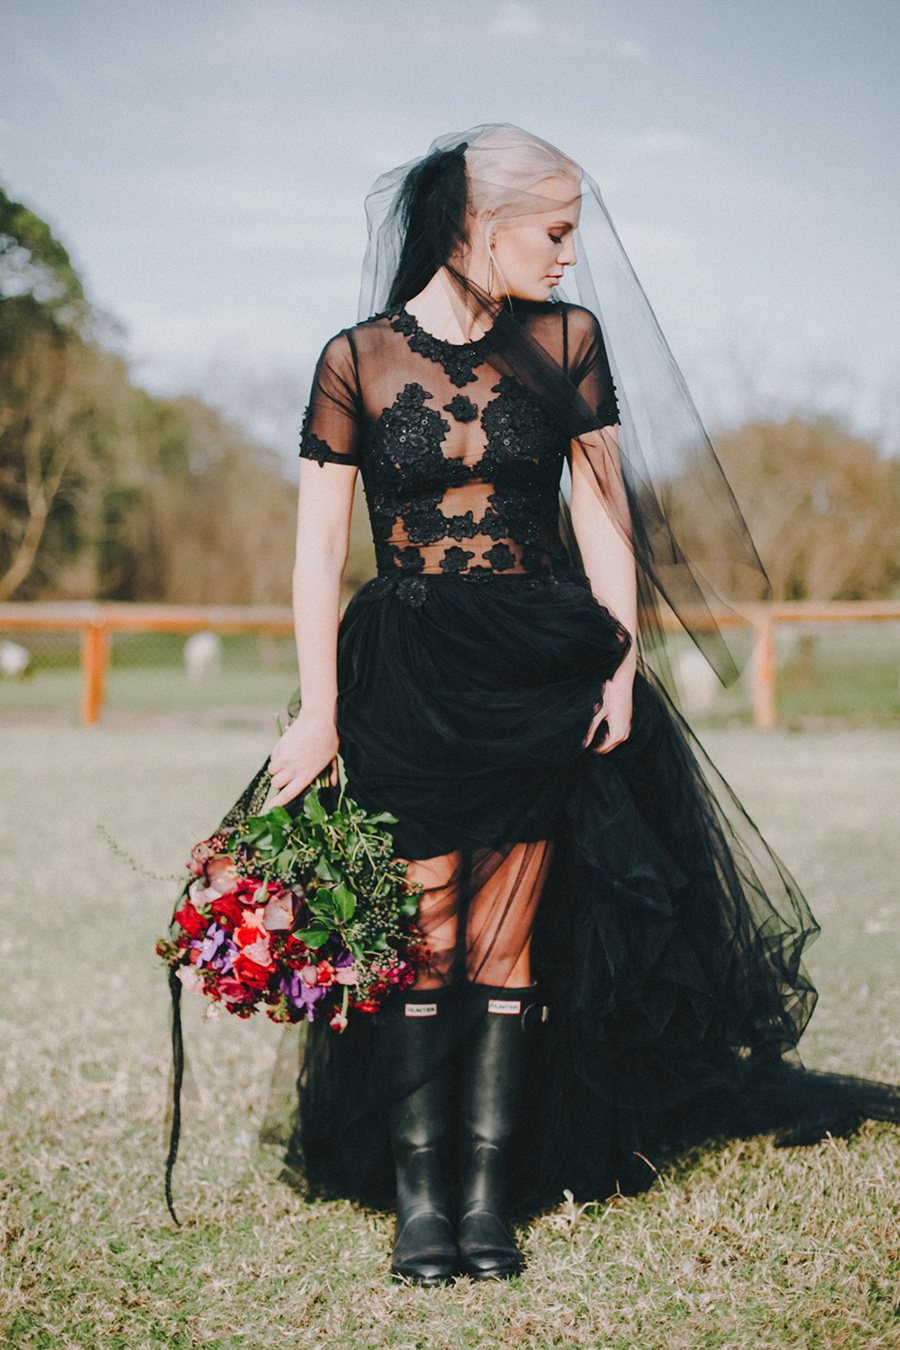 short sleeve illusion black lace applique bodice wedding dress with a layered tulle skirt and a long veil